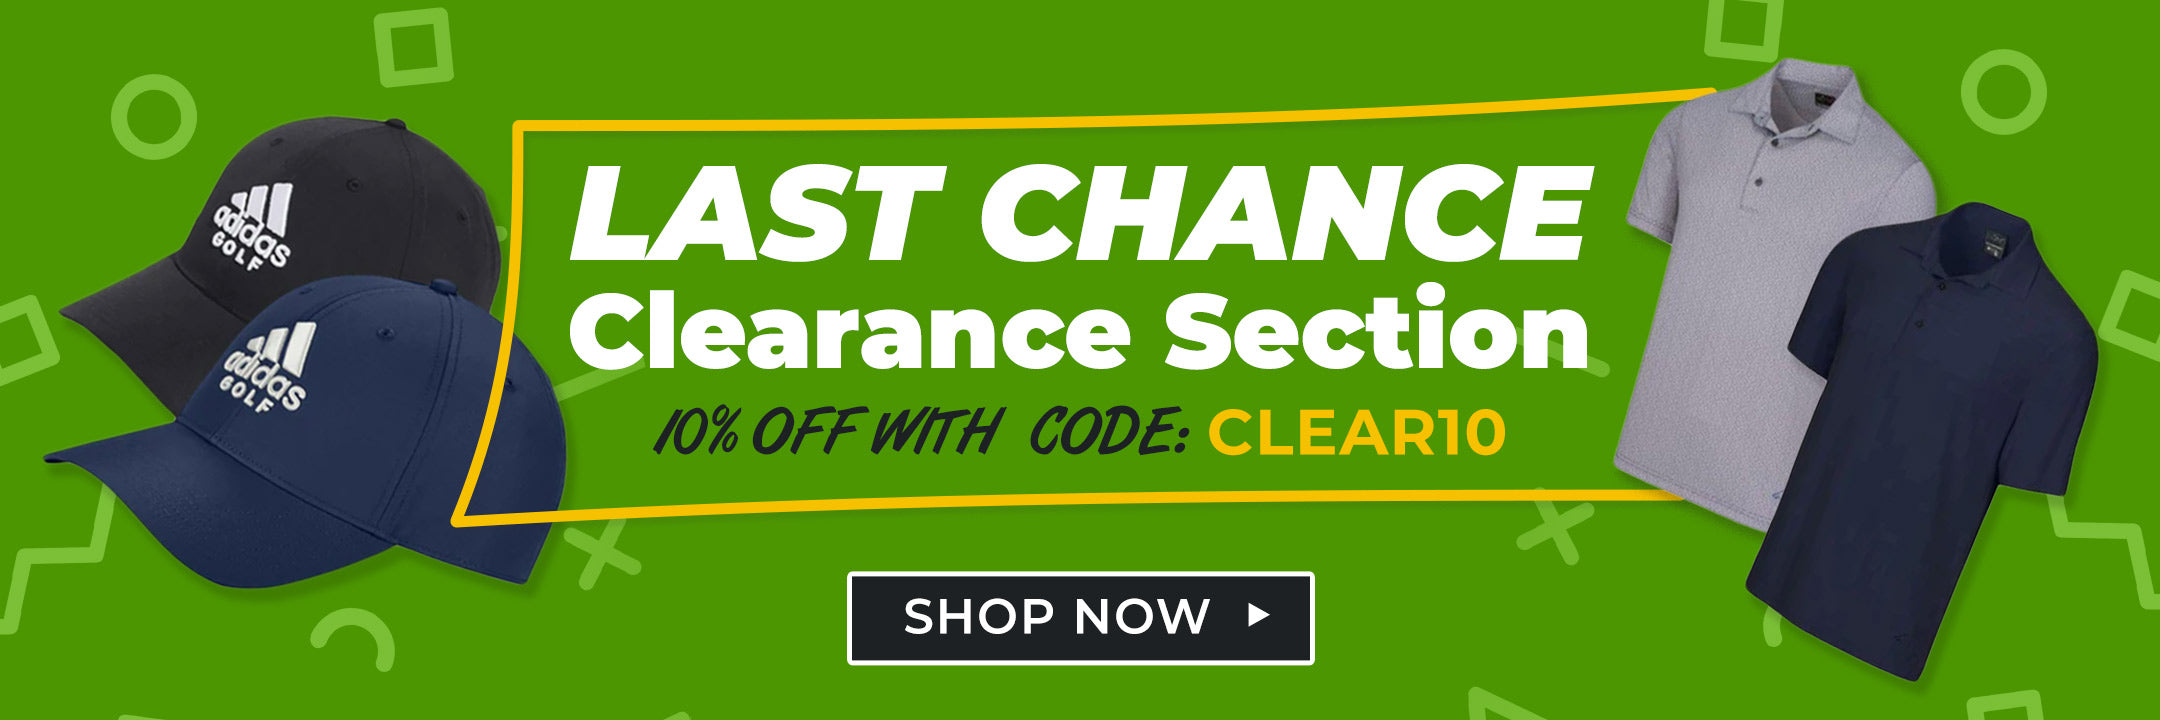 Save an Extra 10% on Clearance Golf Products! Save big on some of the biggest brands in the game!